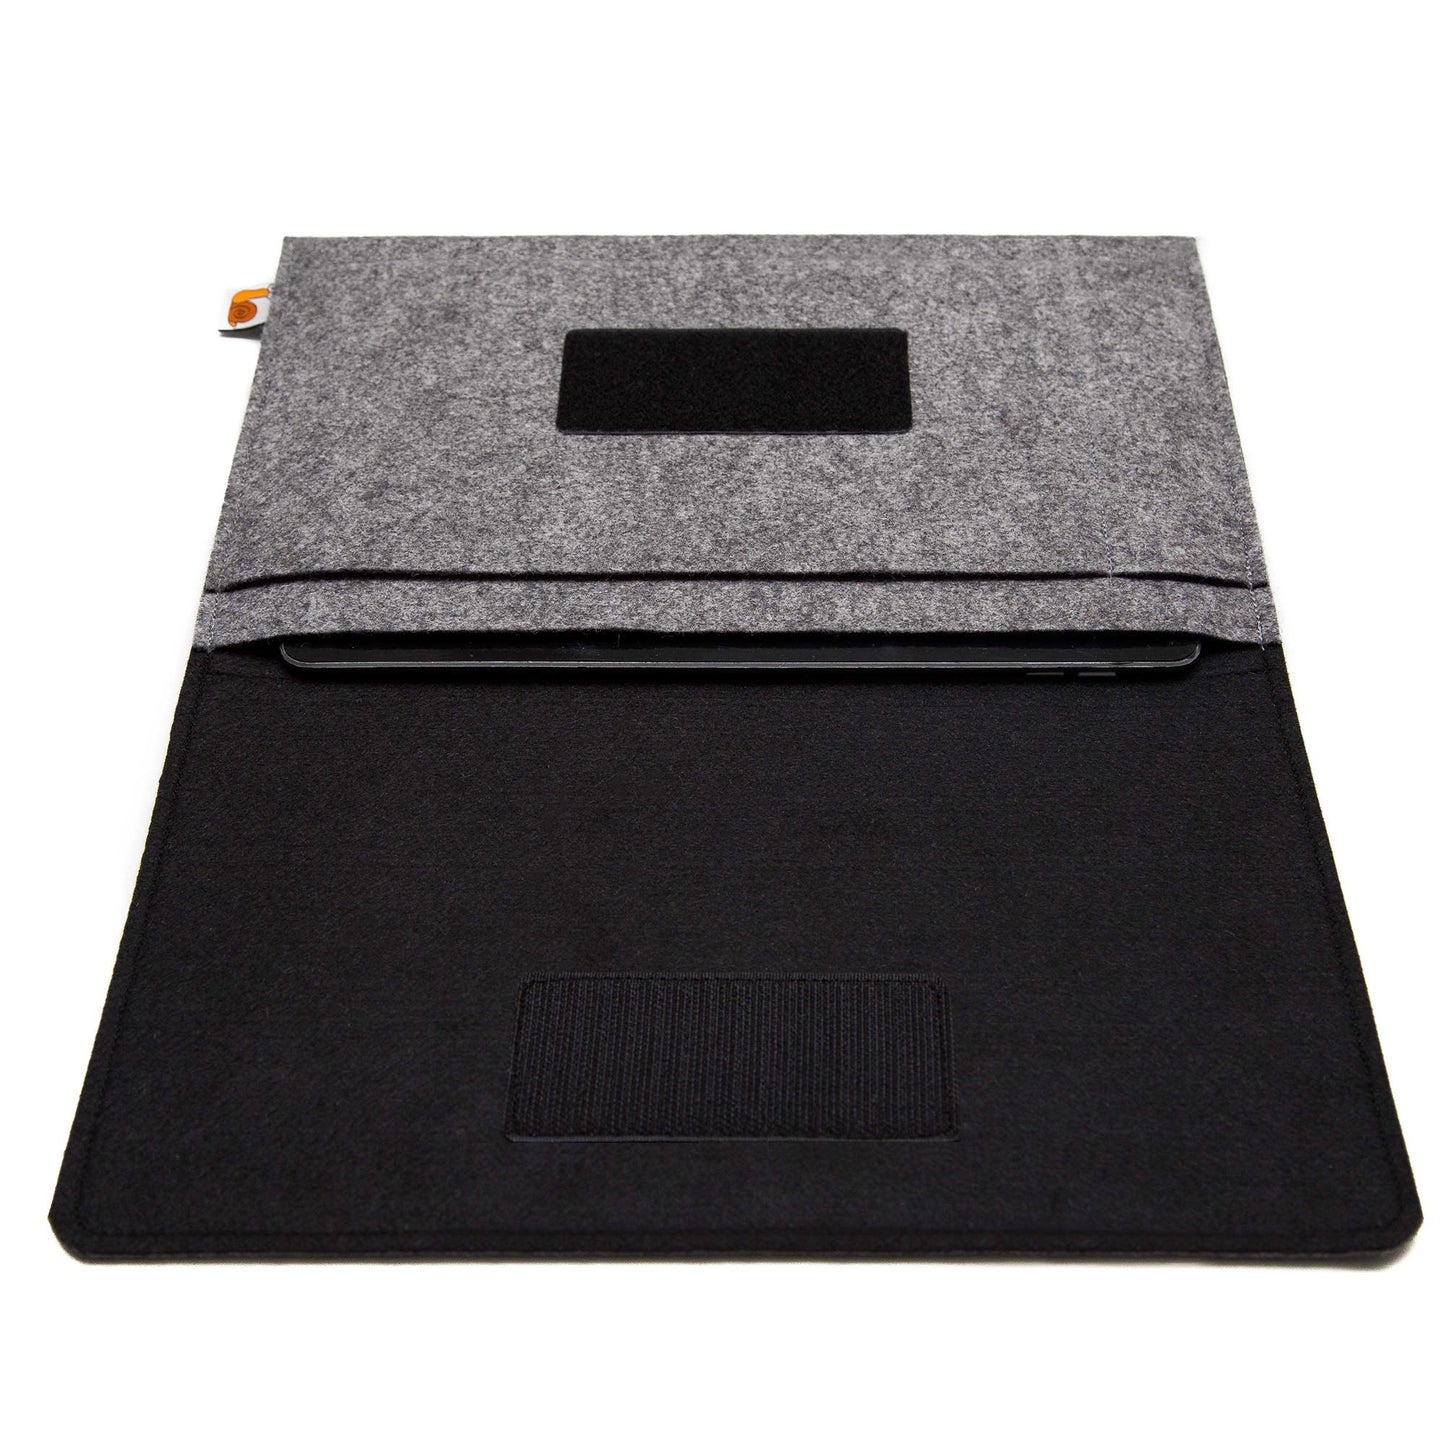 Premium Felt iPad Cover: Ultimate Protection with Accessories Pocket - Grey & Black